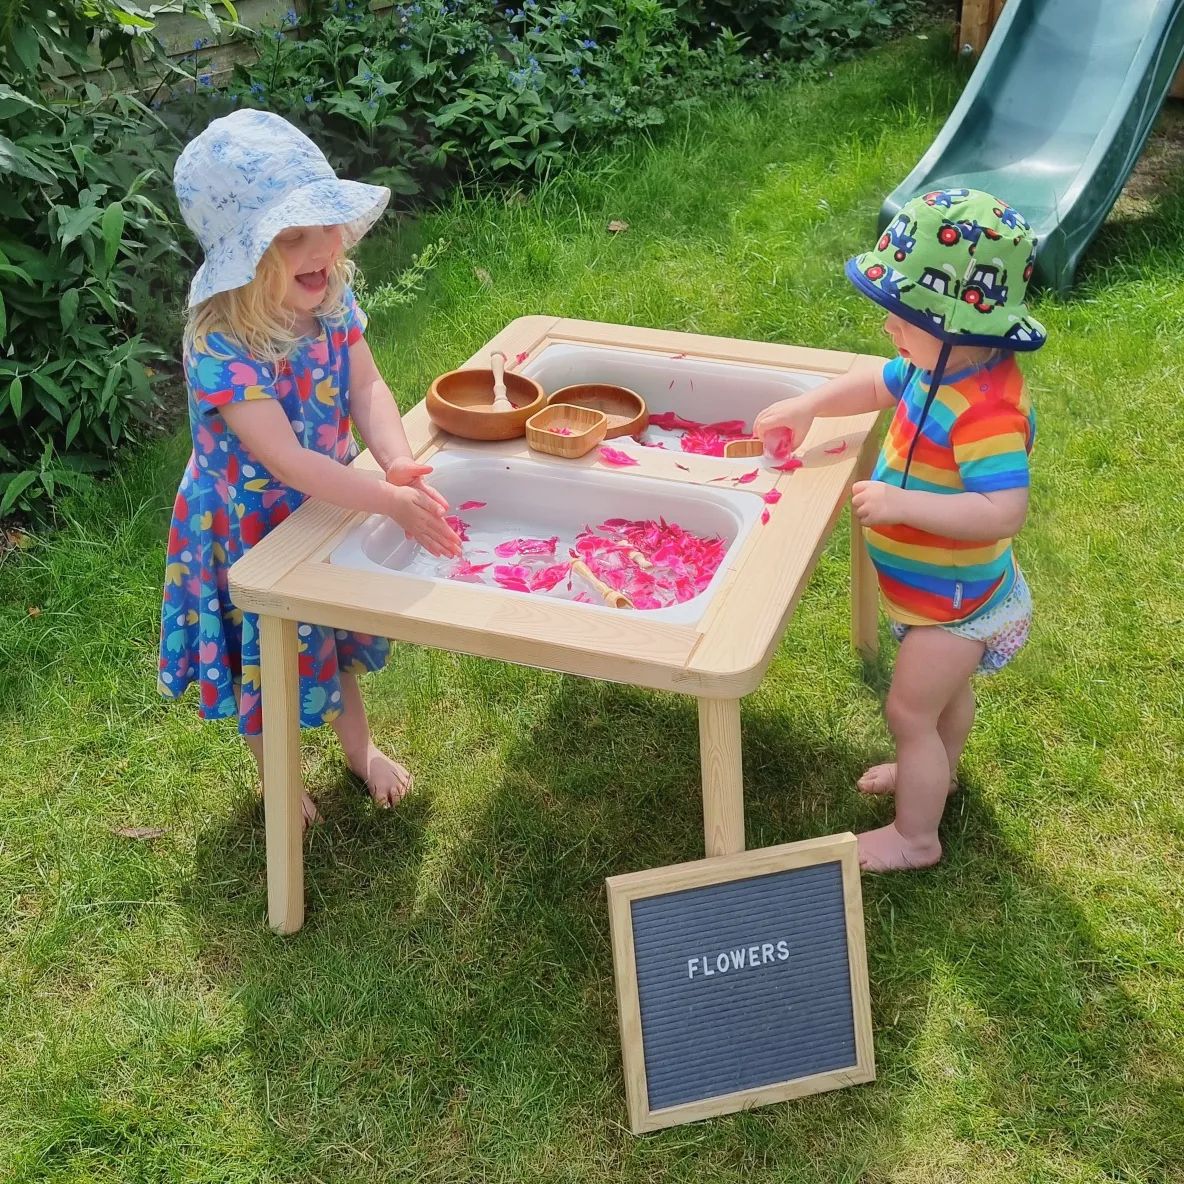 Children playing with flowers in an outdoor water table. Photo by Instagram user @the_future_is_yours_11